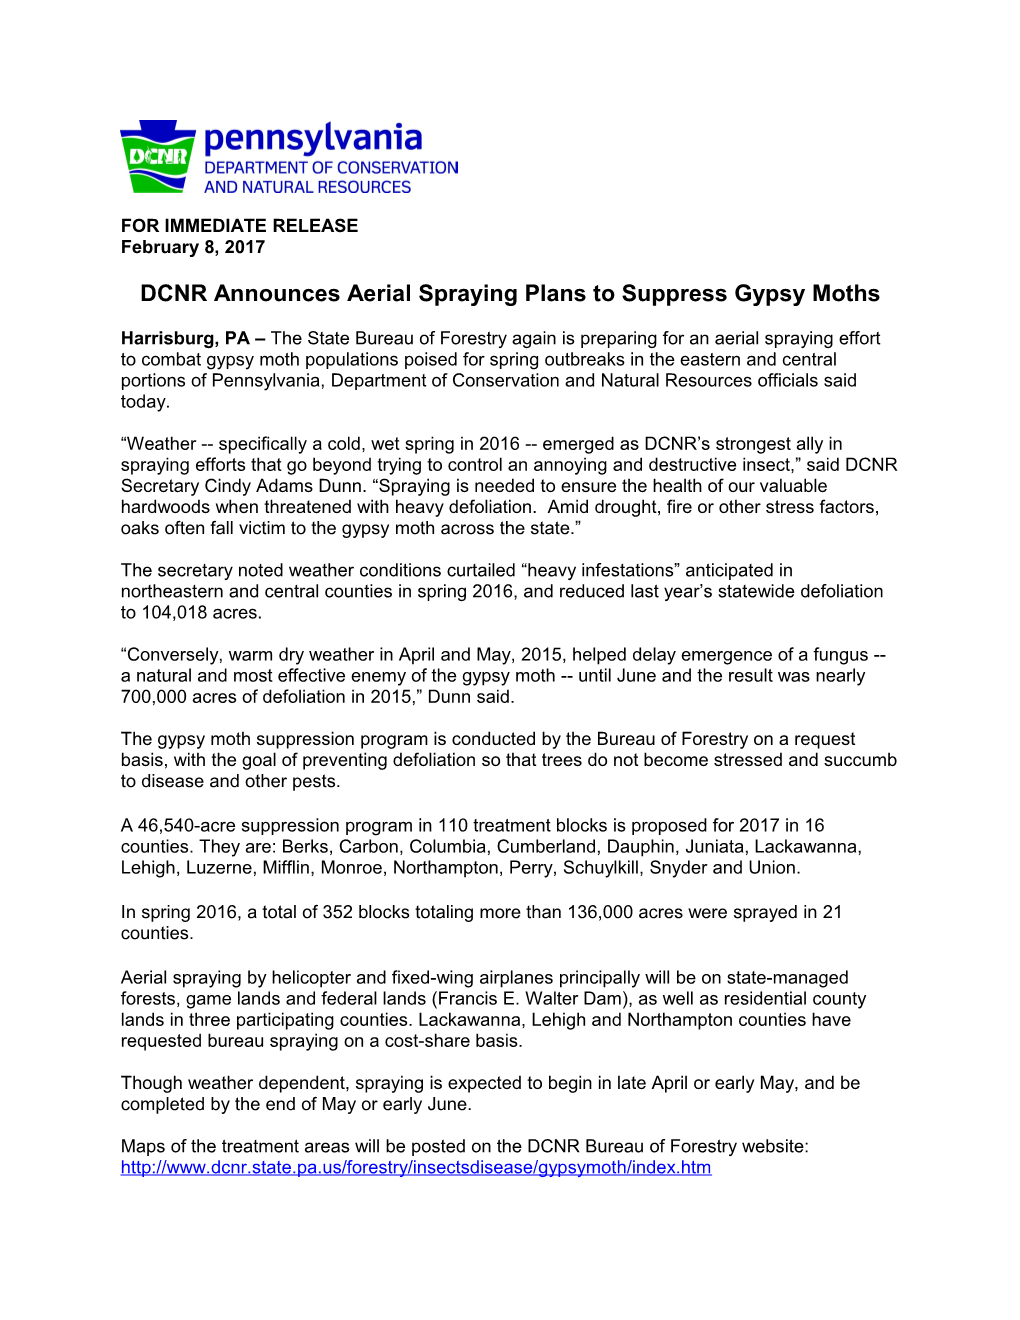 DCNR Announces Aerial Spraying Plans to Suppress Gypsy Moths